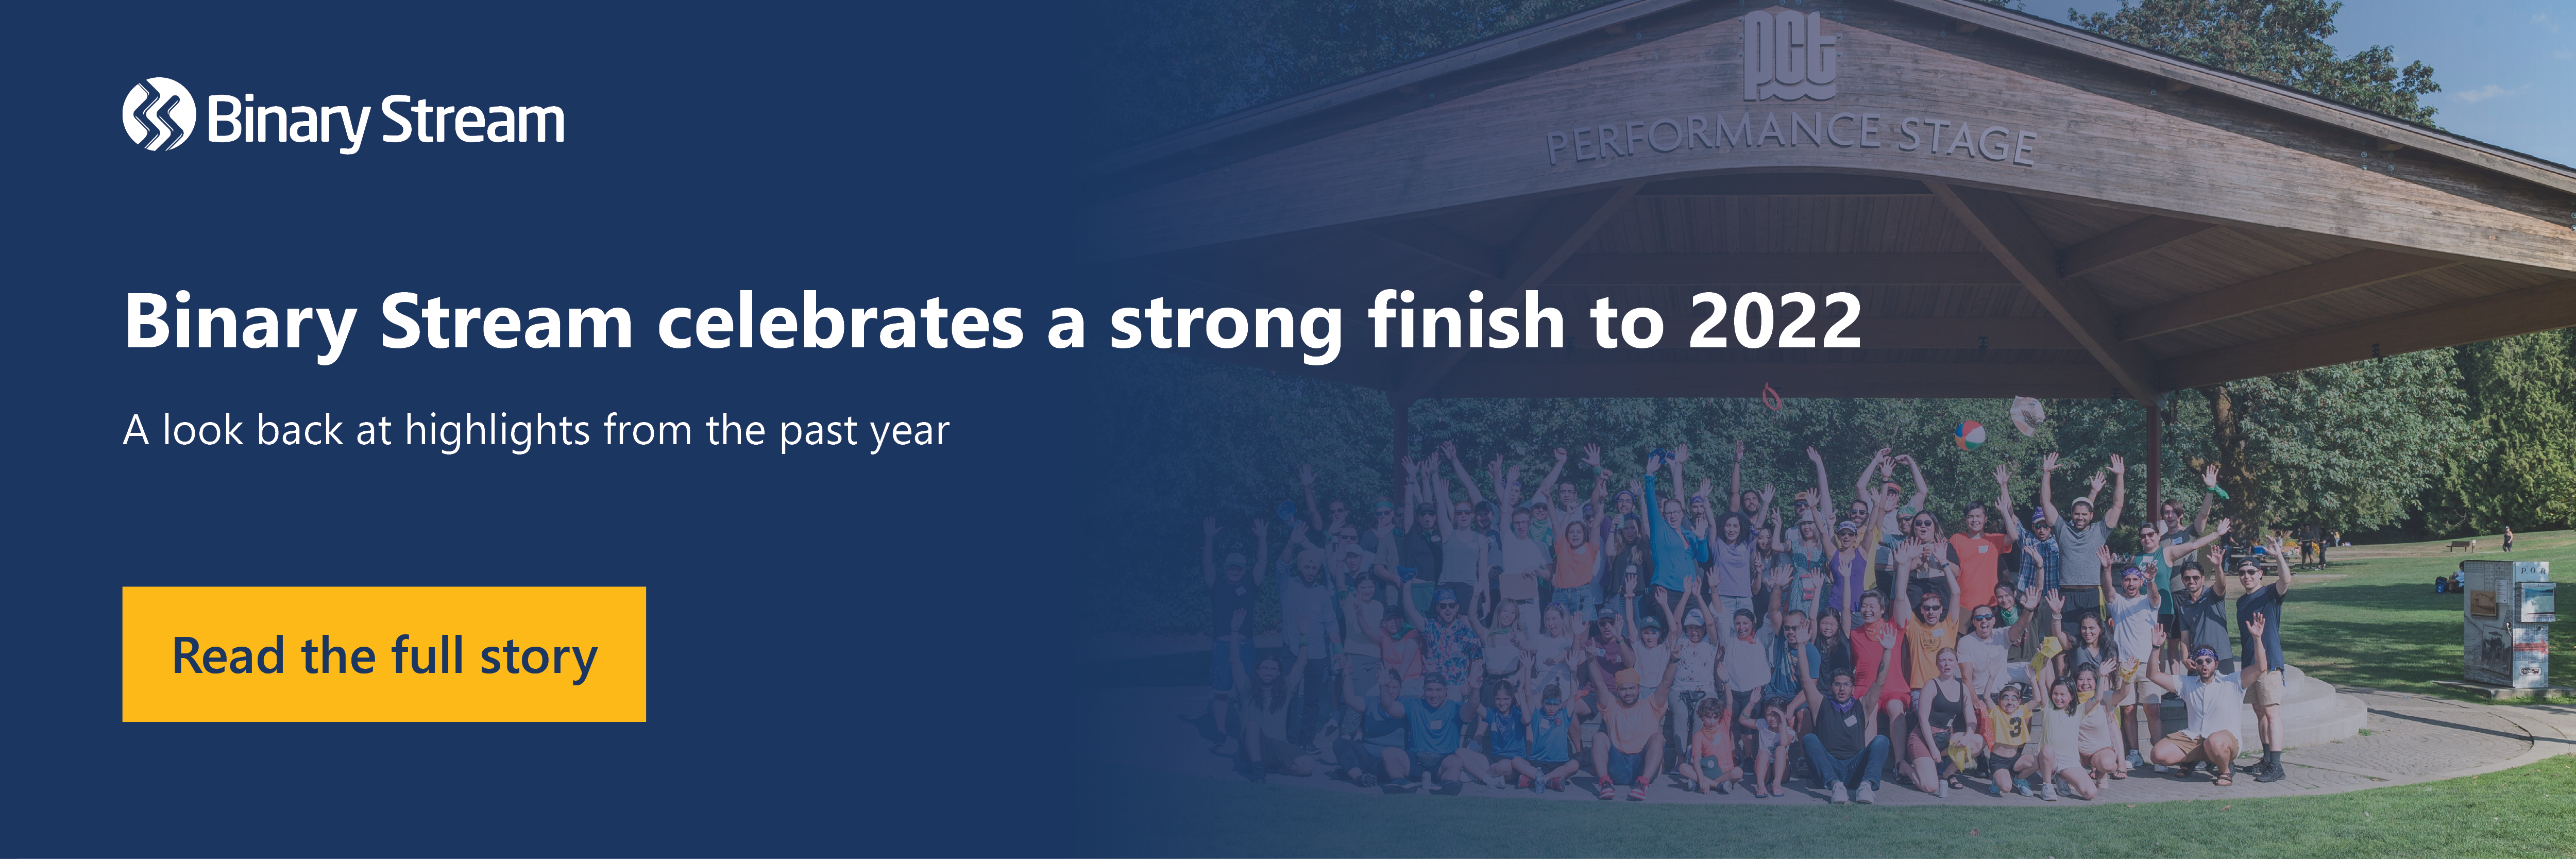 Check out this recap of our highlights and successes from 2022.